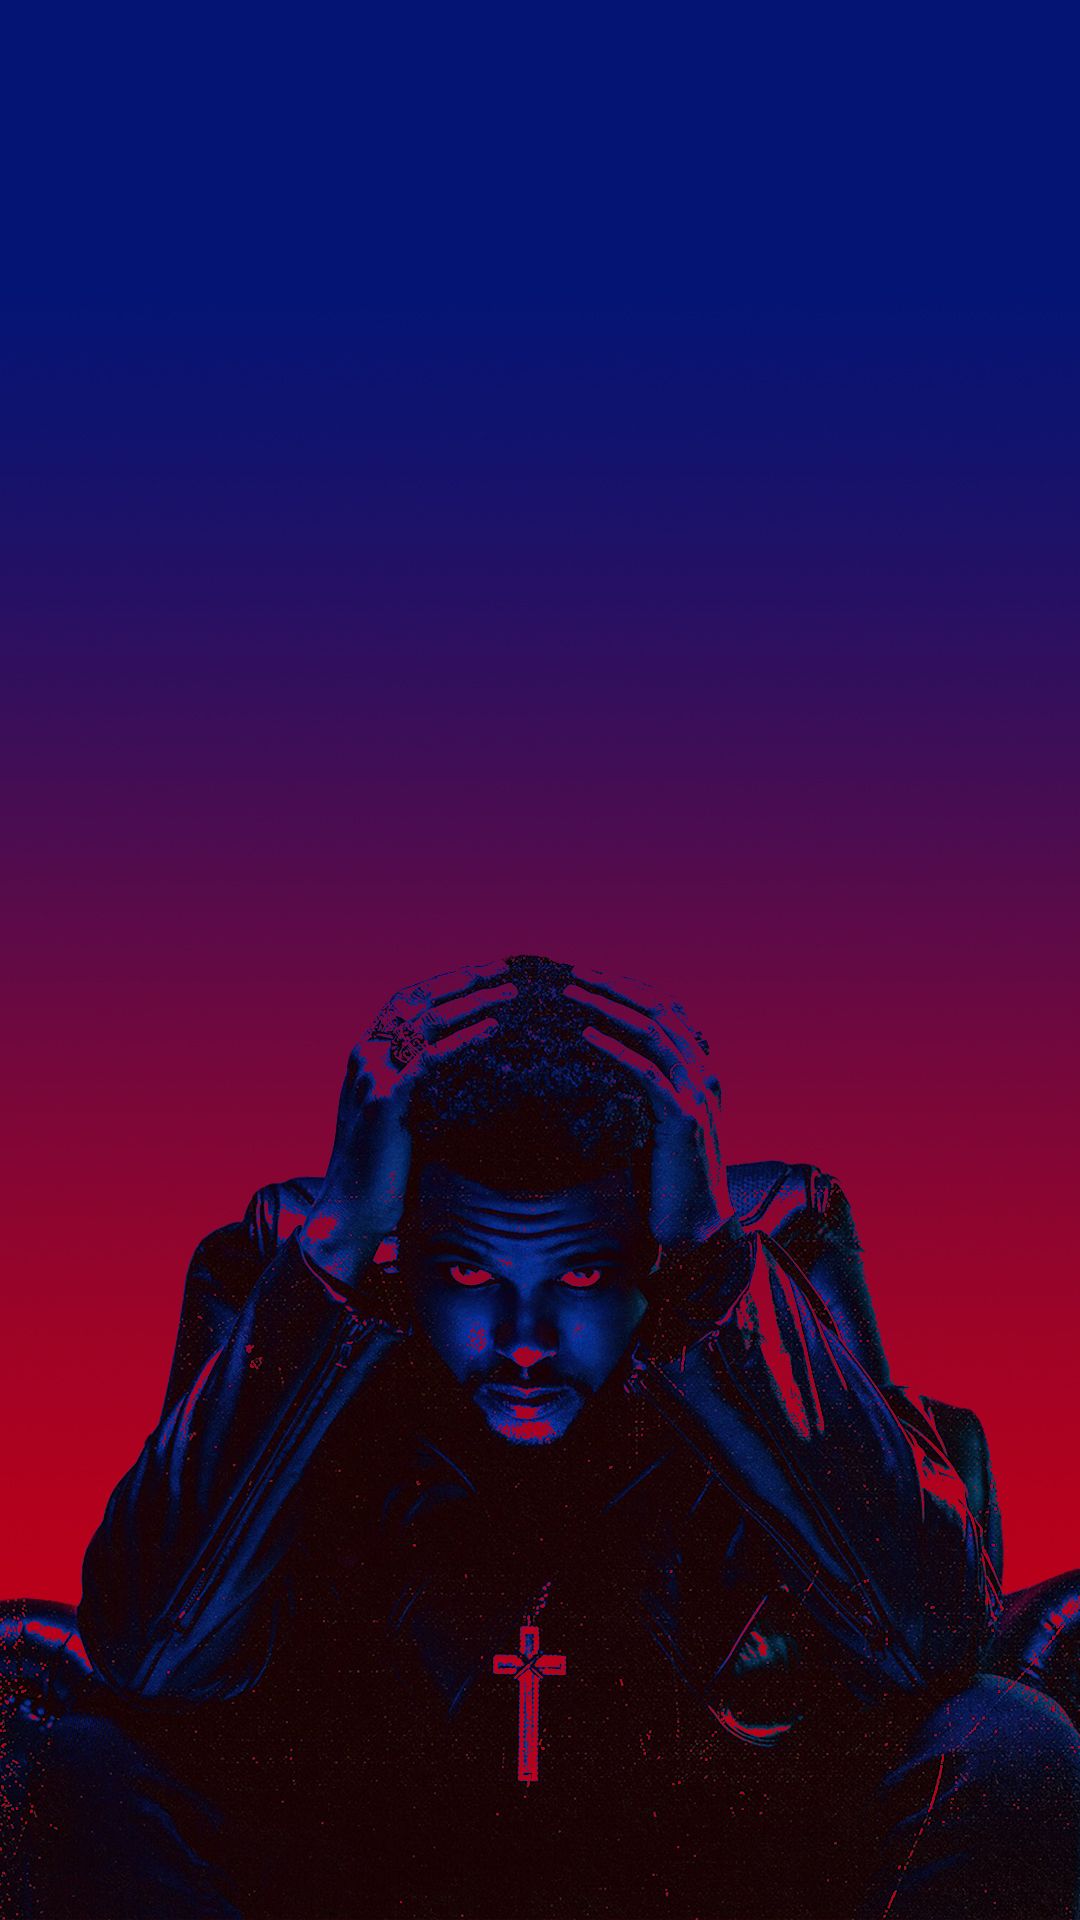 Starboy Custom iPhone Plus Wallpaper By Trackos With Image